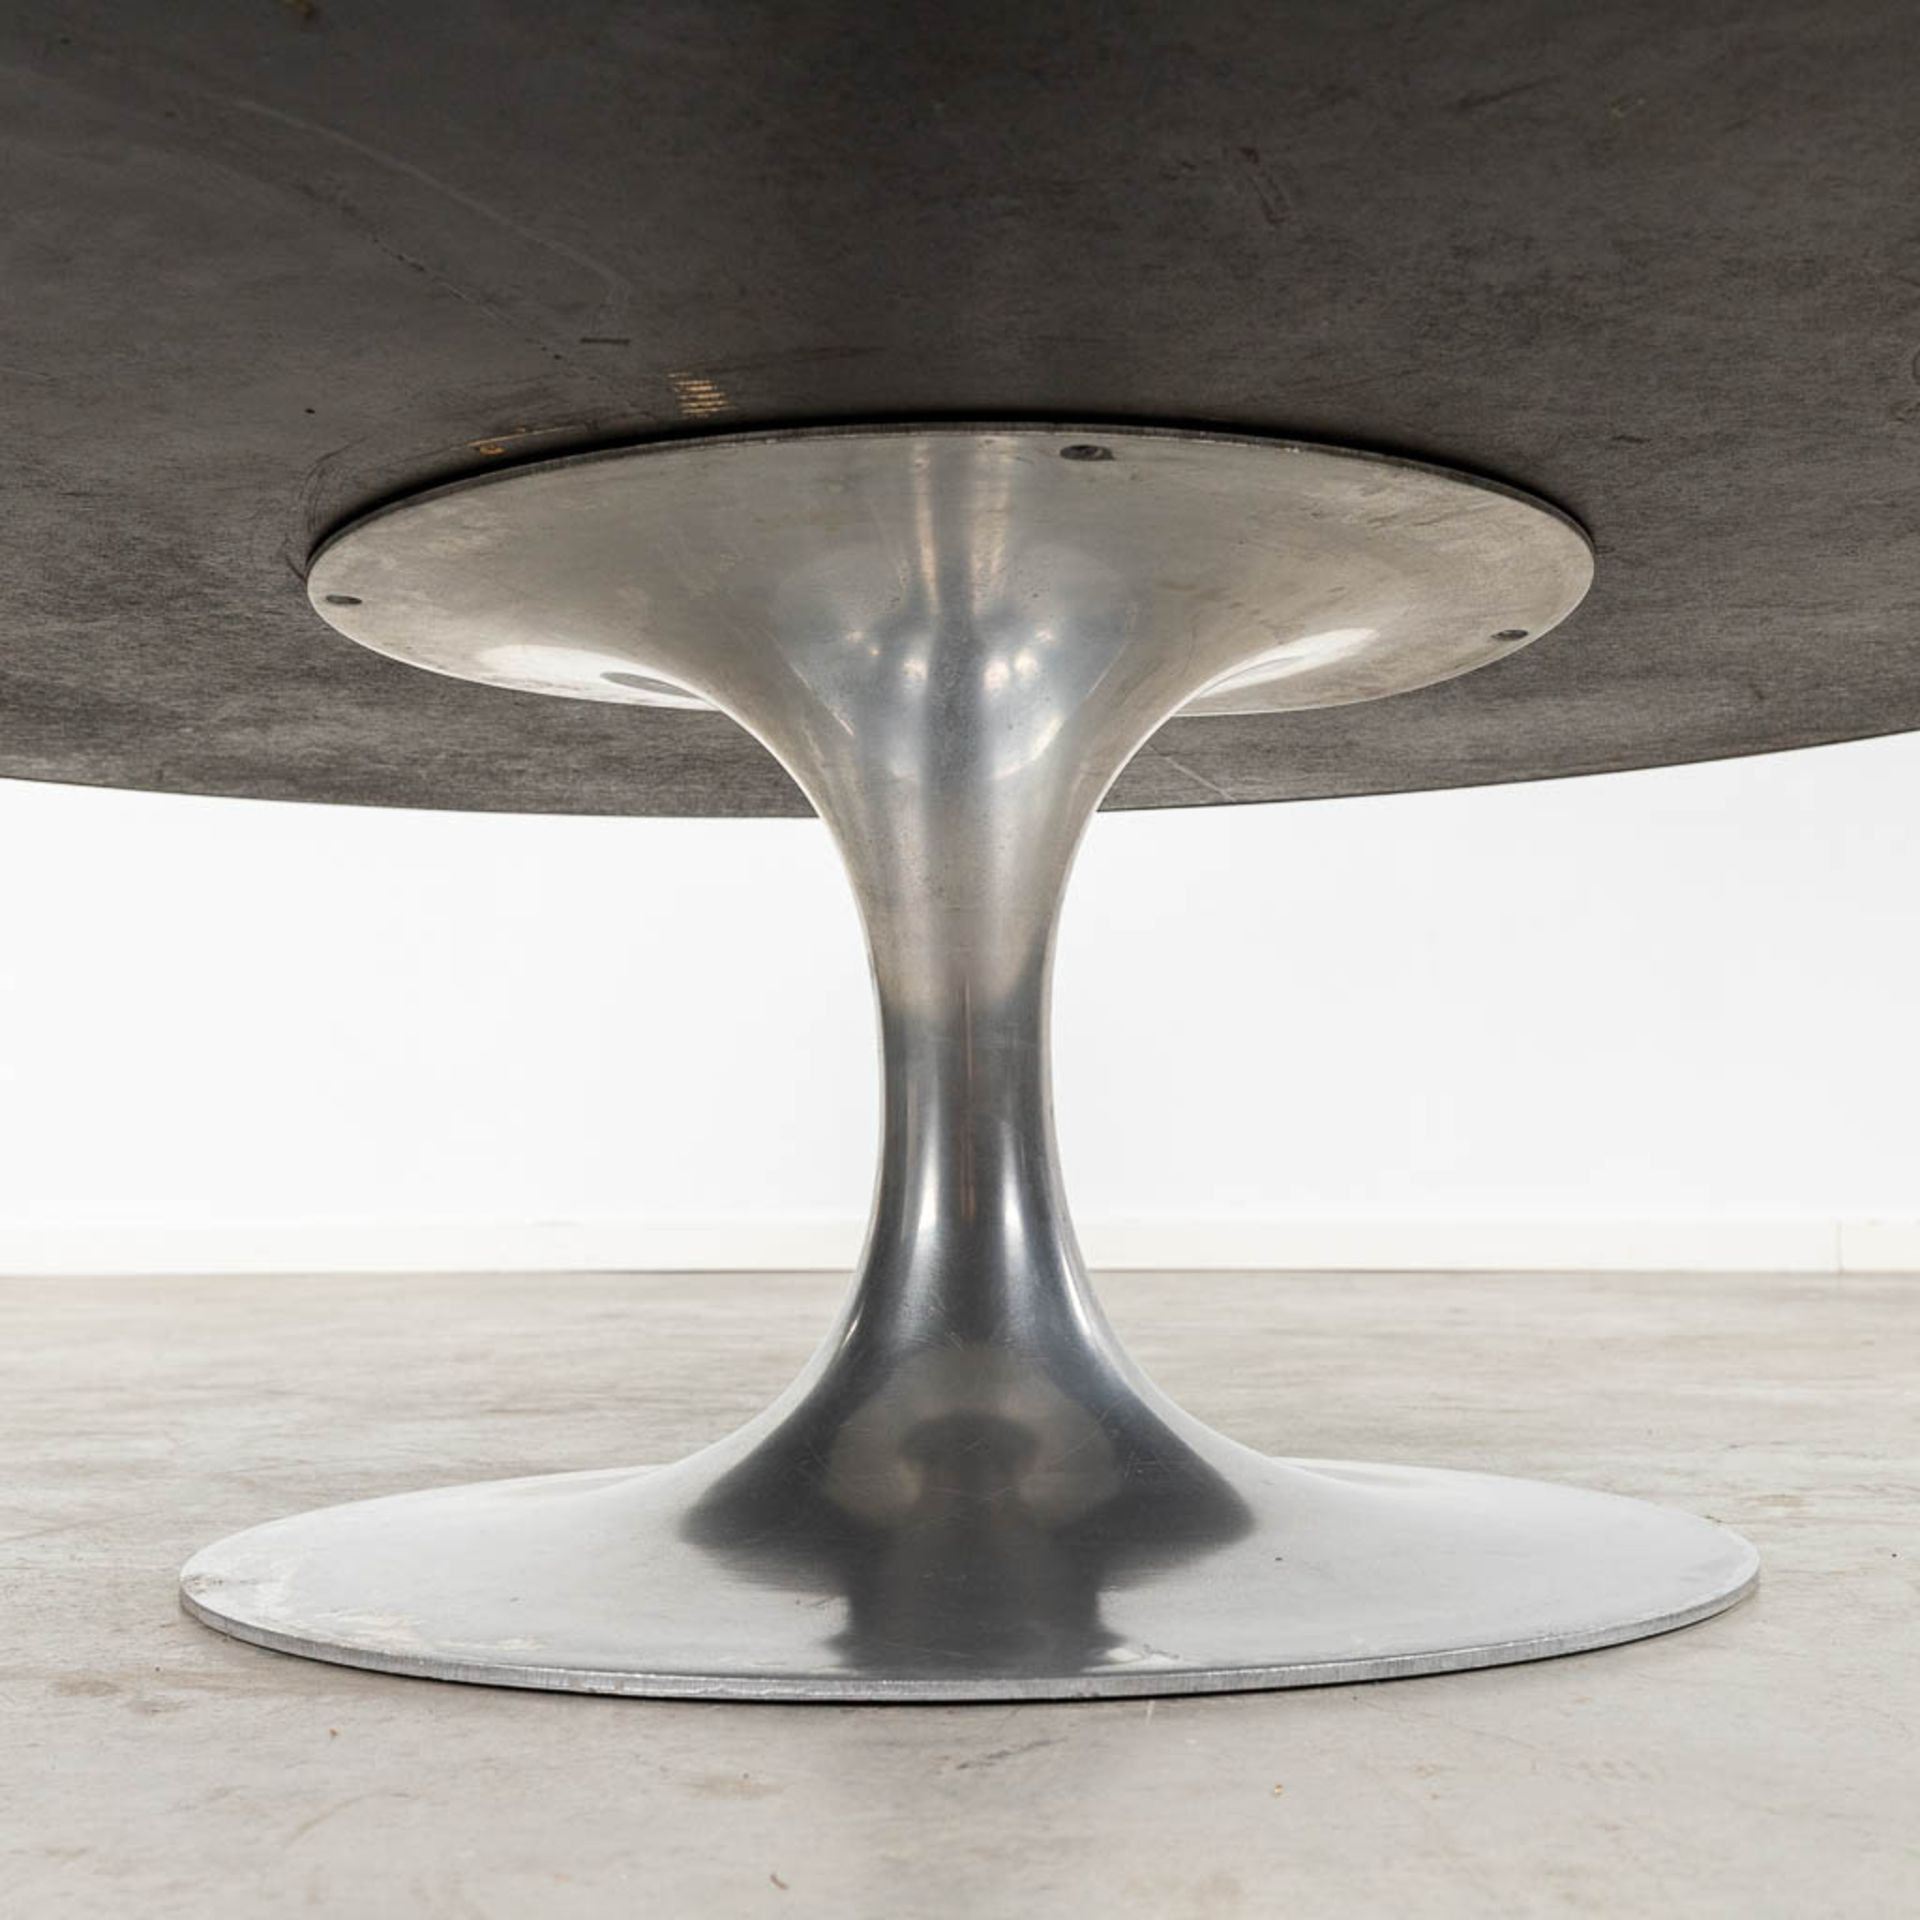 Just Lichtenberg for Poul CADOVIUS (1911-2011) 'Coffee Table'. Denmark, 20th C. (W:125 x H:41 cm) - Image 10 of 13